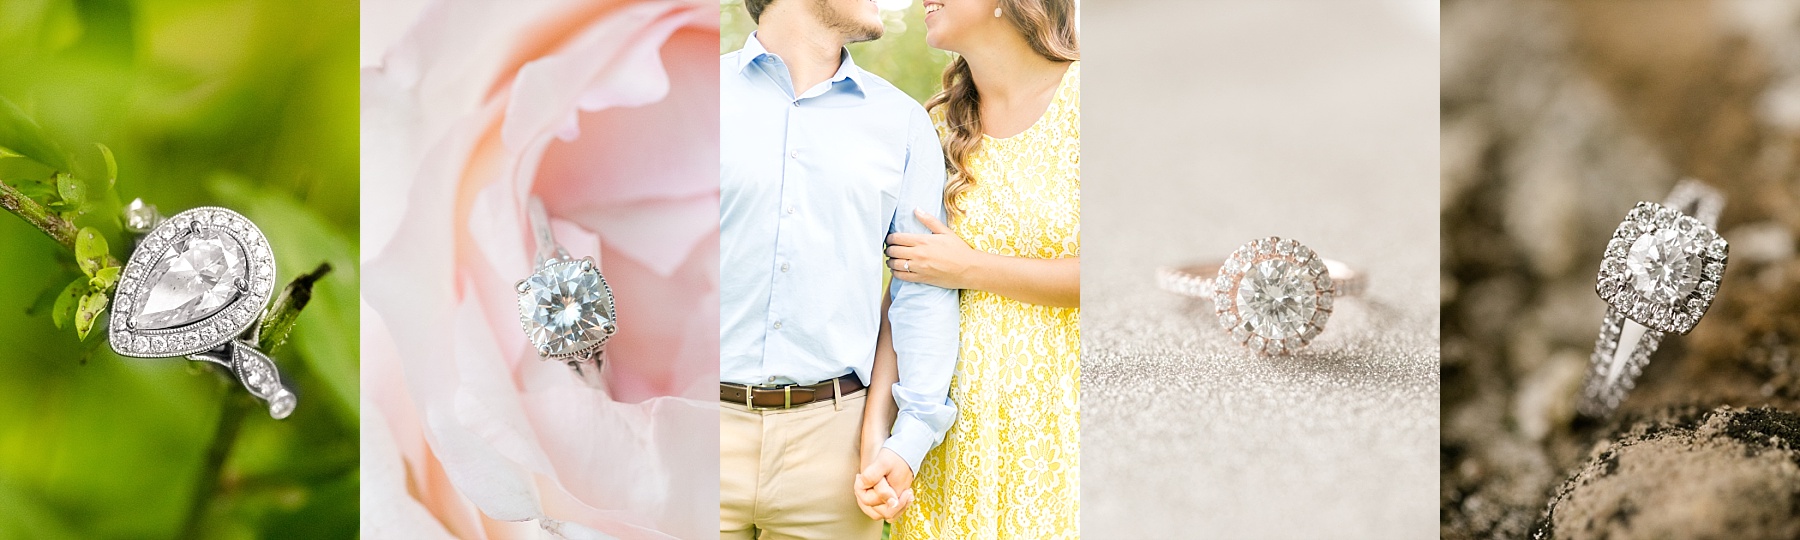 Engagement session tips to help you prep for being in front of the camera.